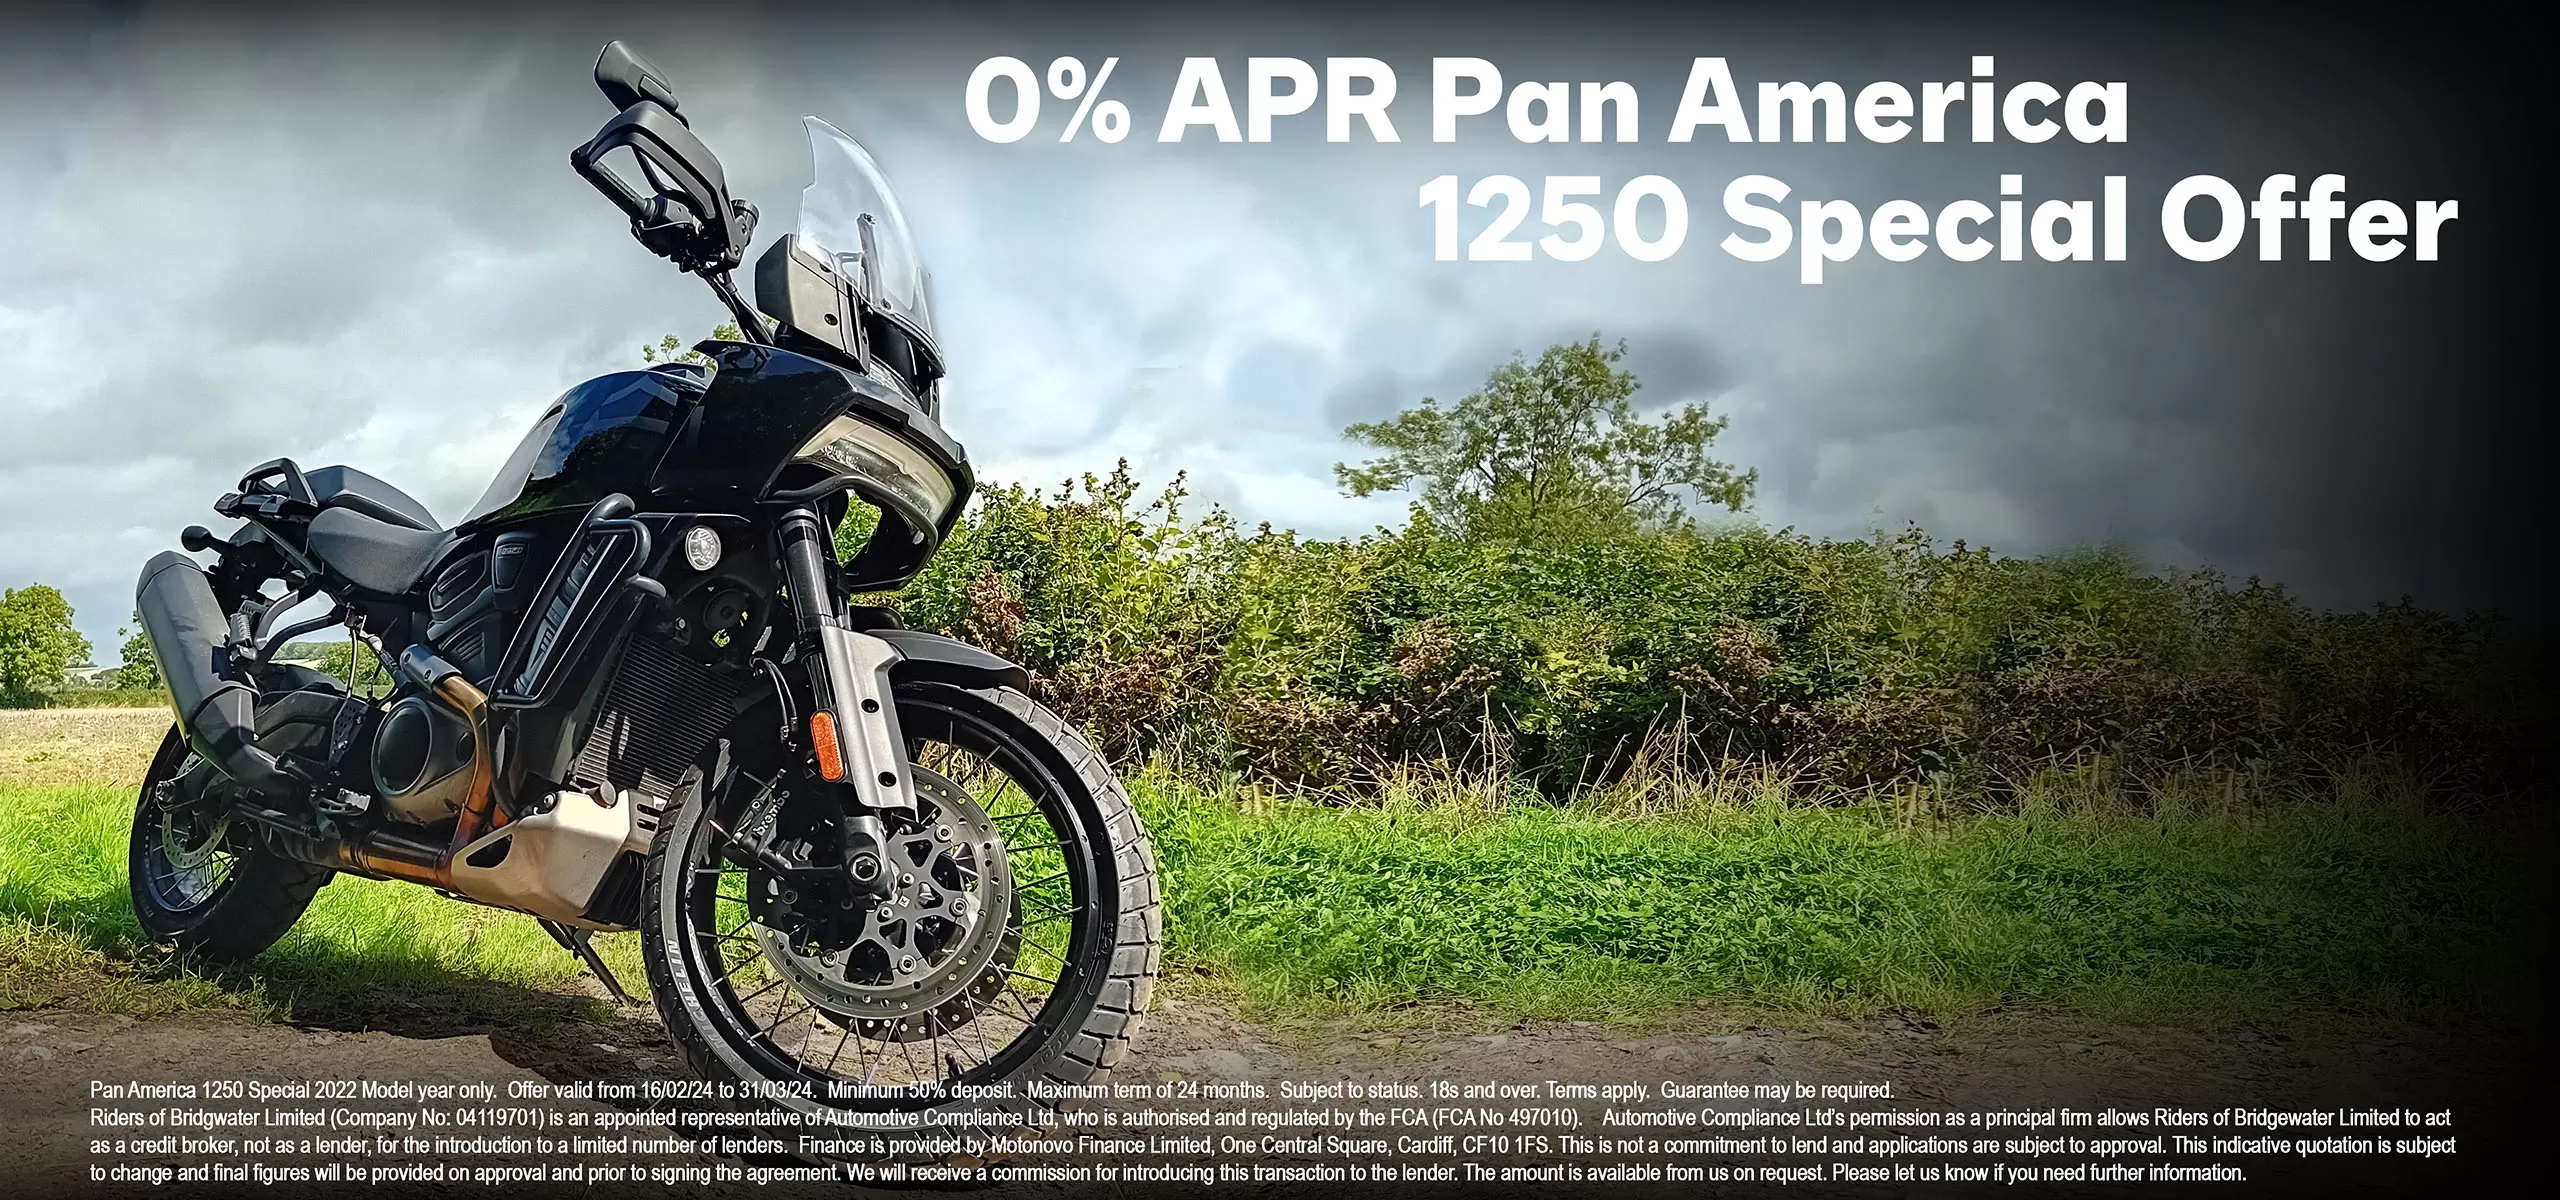 0% On Pan America 1250 Special Offer